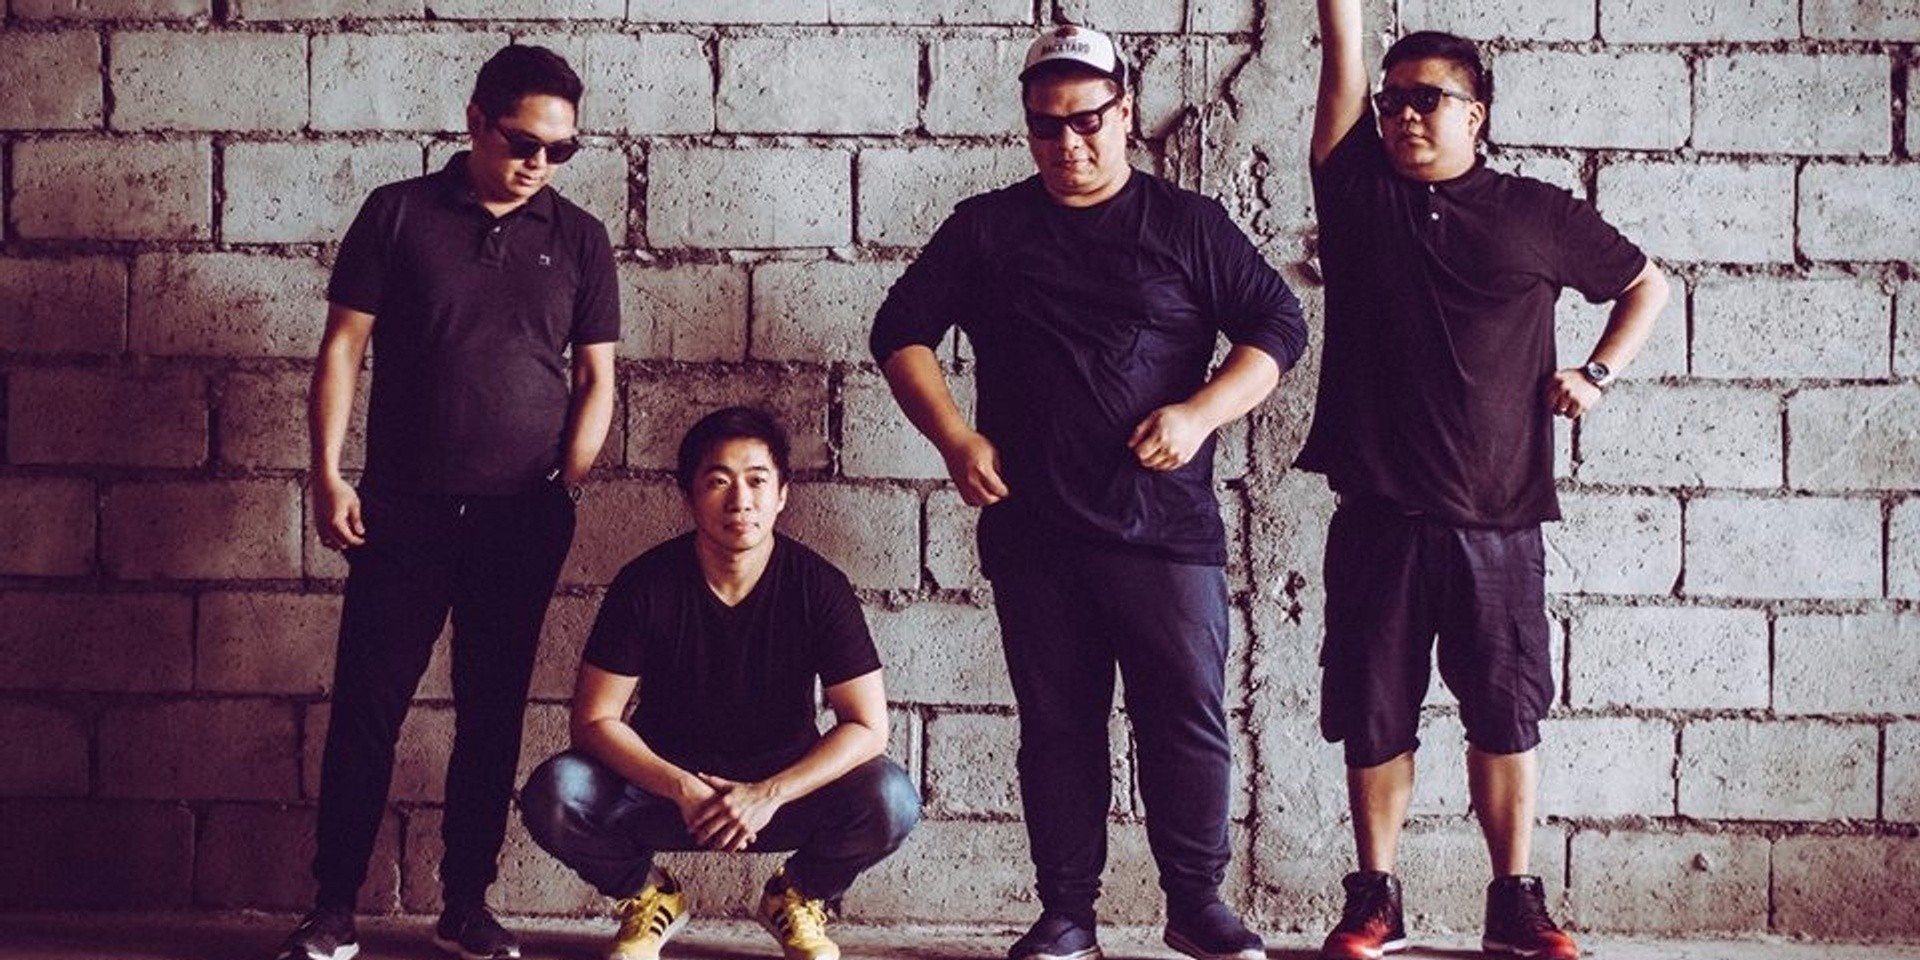 The Itchyworms' Singapore concert has been cancelled